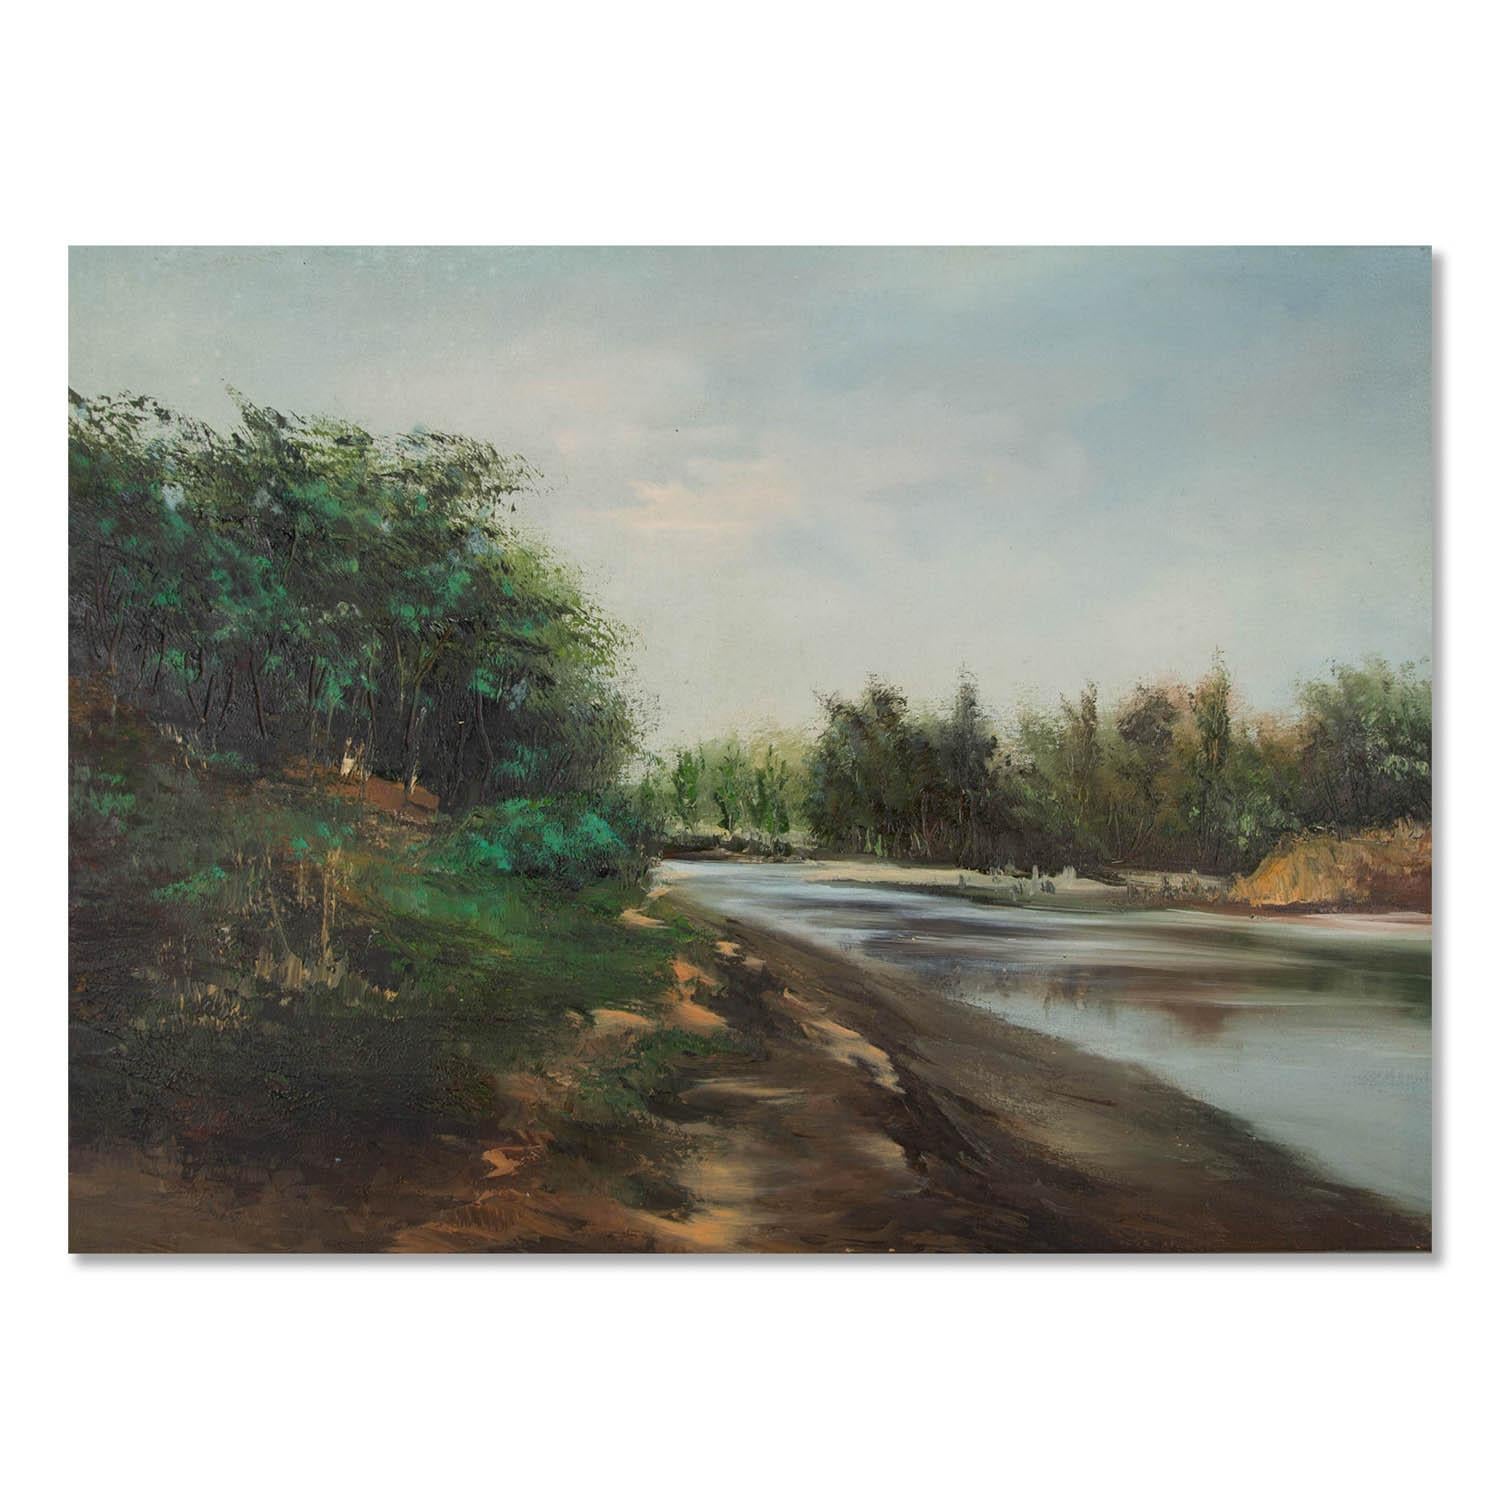  Title: Next To The River
 Medium: Oil on canvas
 Size: 22 x 30 inches
 Frame: Framing options available!
 Condition: The painting appears to be in excellent condition.
 
 Year: 2000 Circa
 Artist: JIanping Chen
 Signature: Signed
 Signature